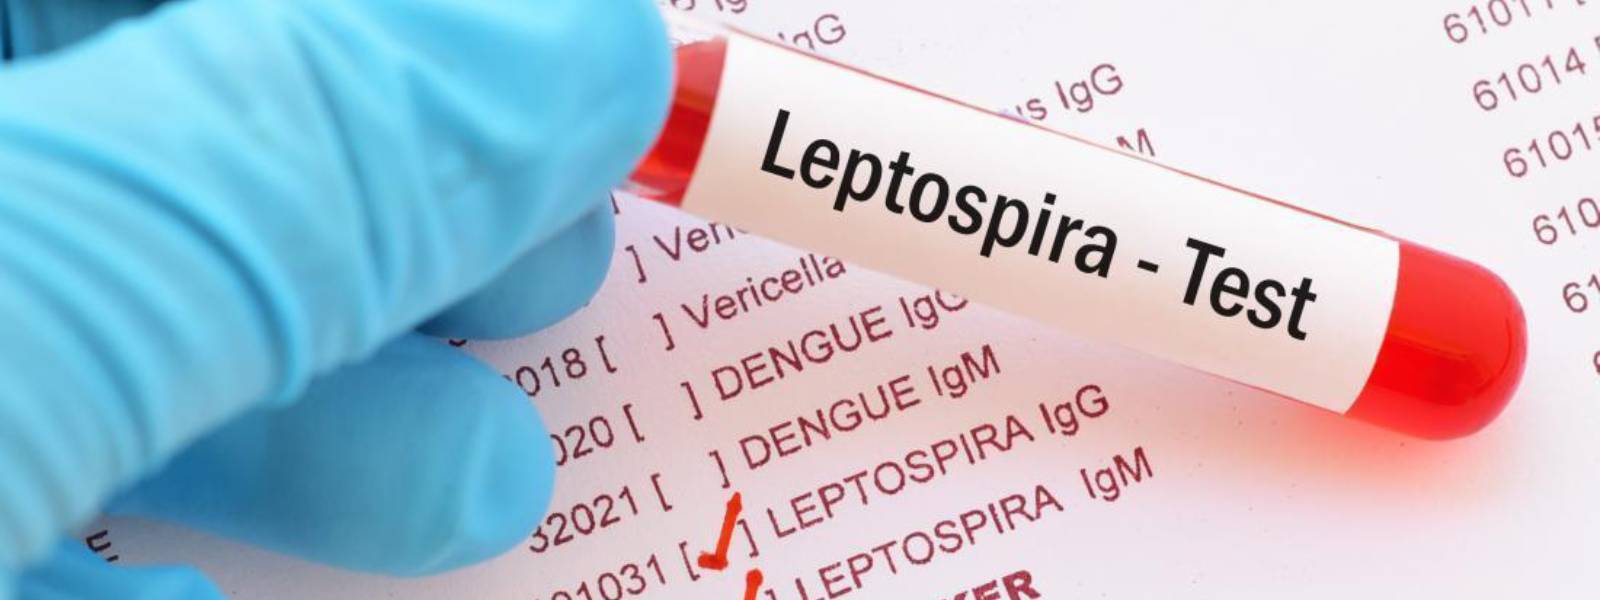 Nearly ten-fold increase in leptospirosis cases